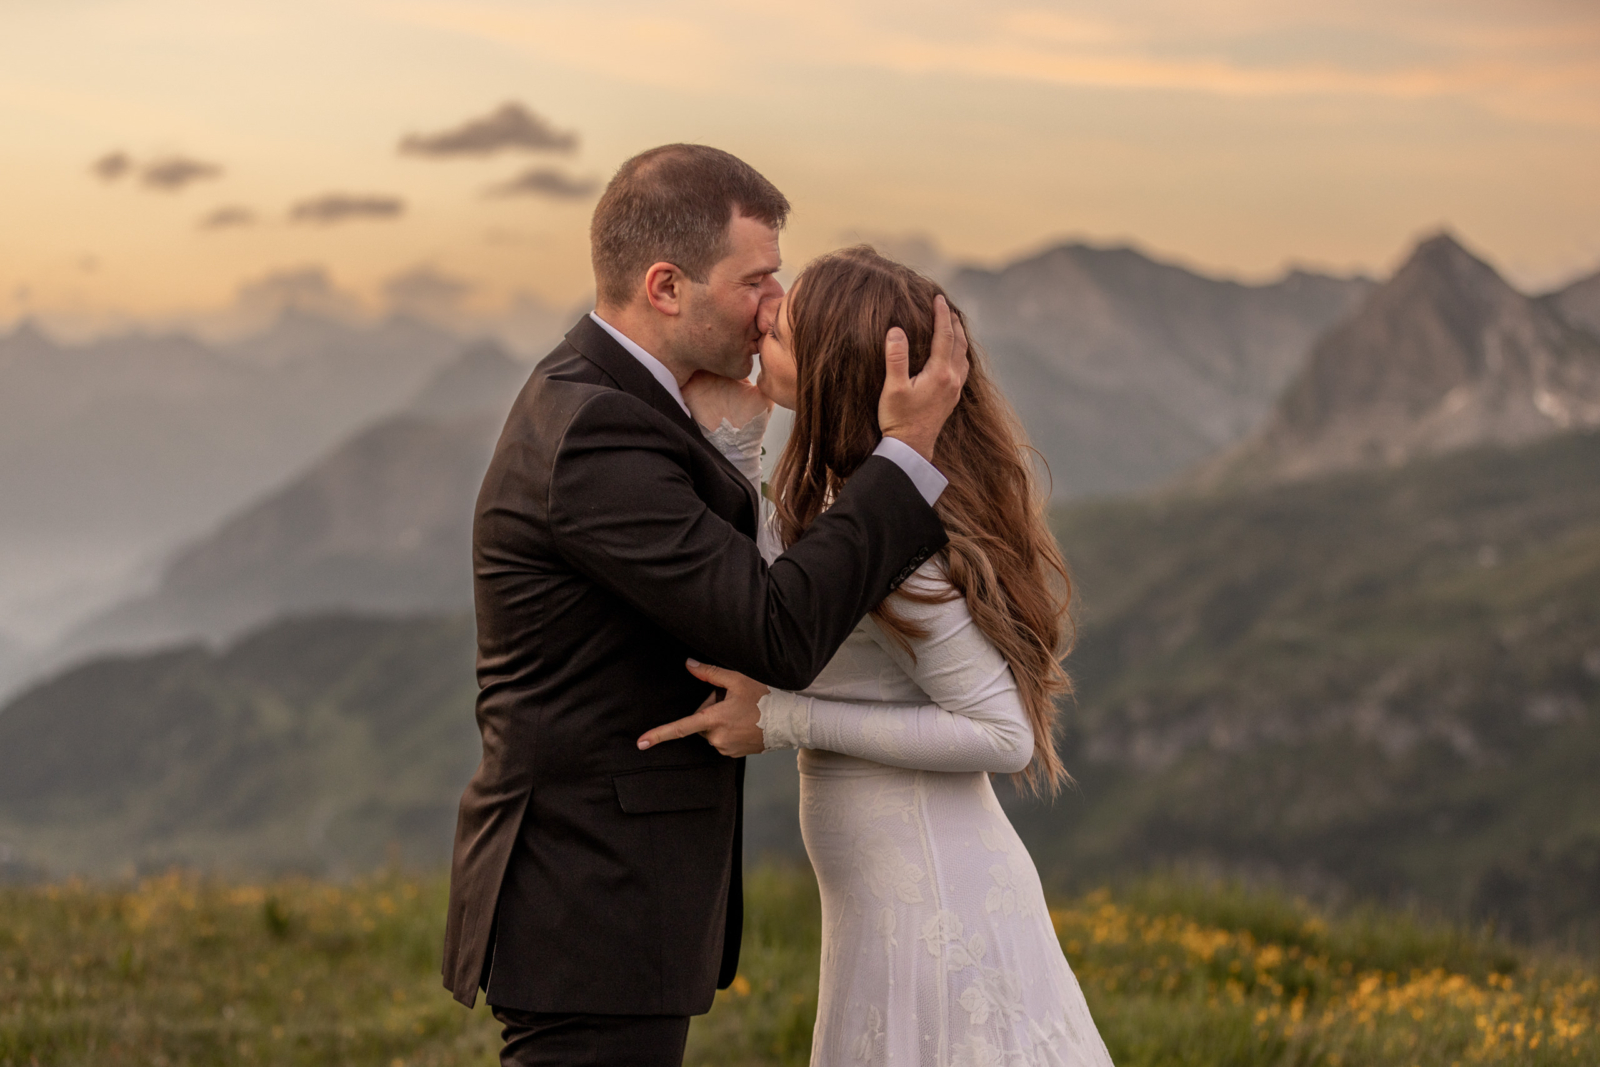 First Kiss at the mountain wedding in Austria